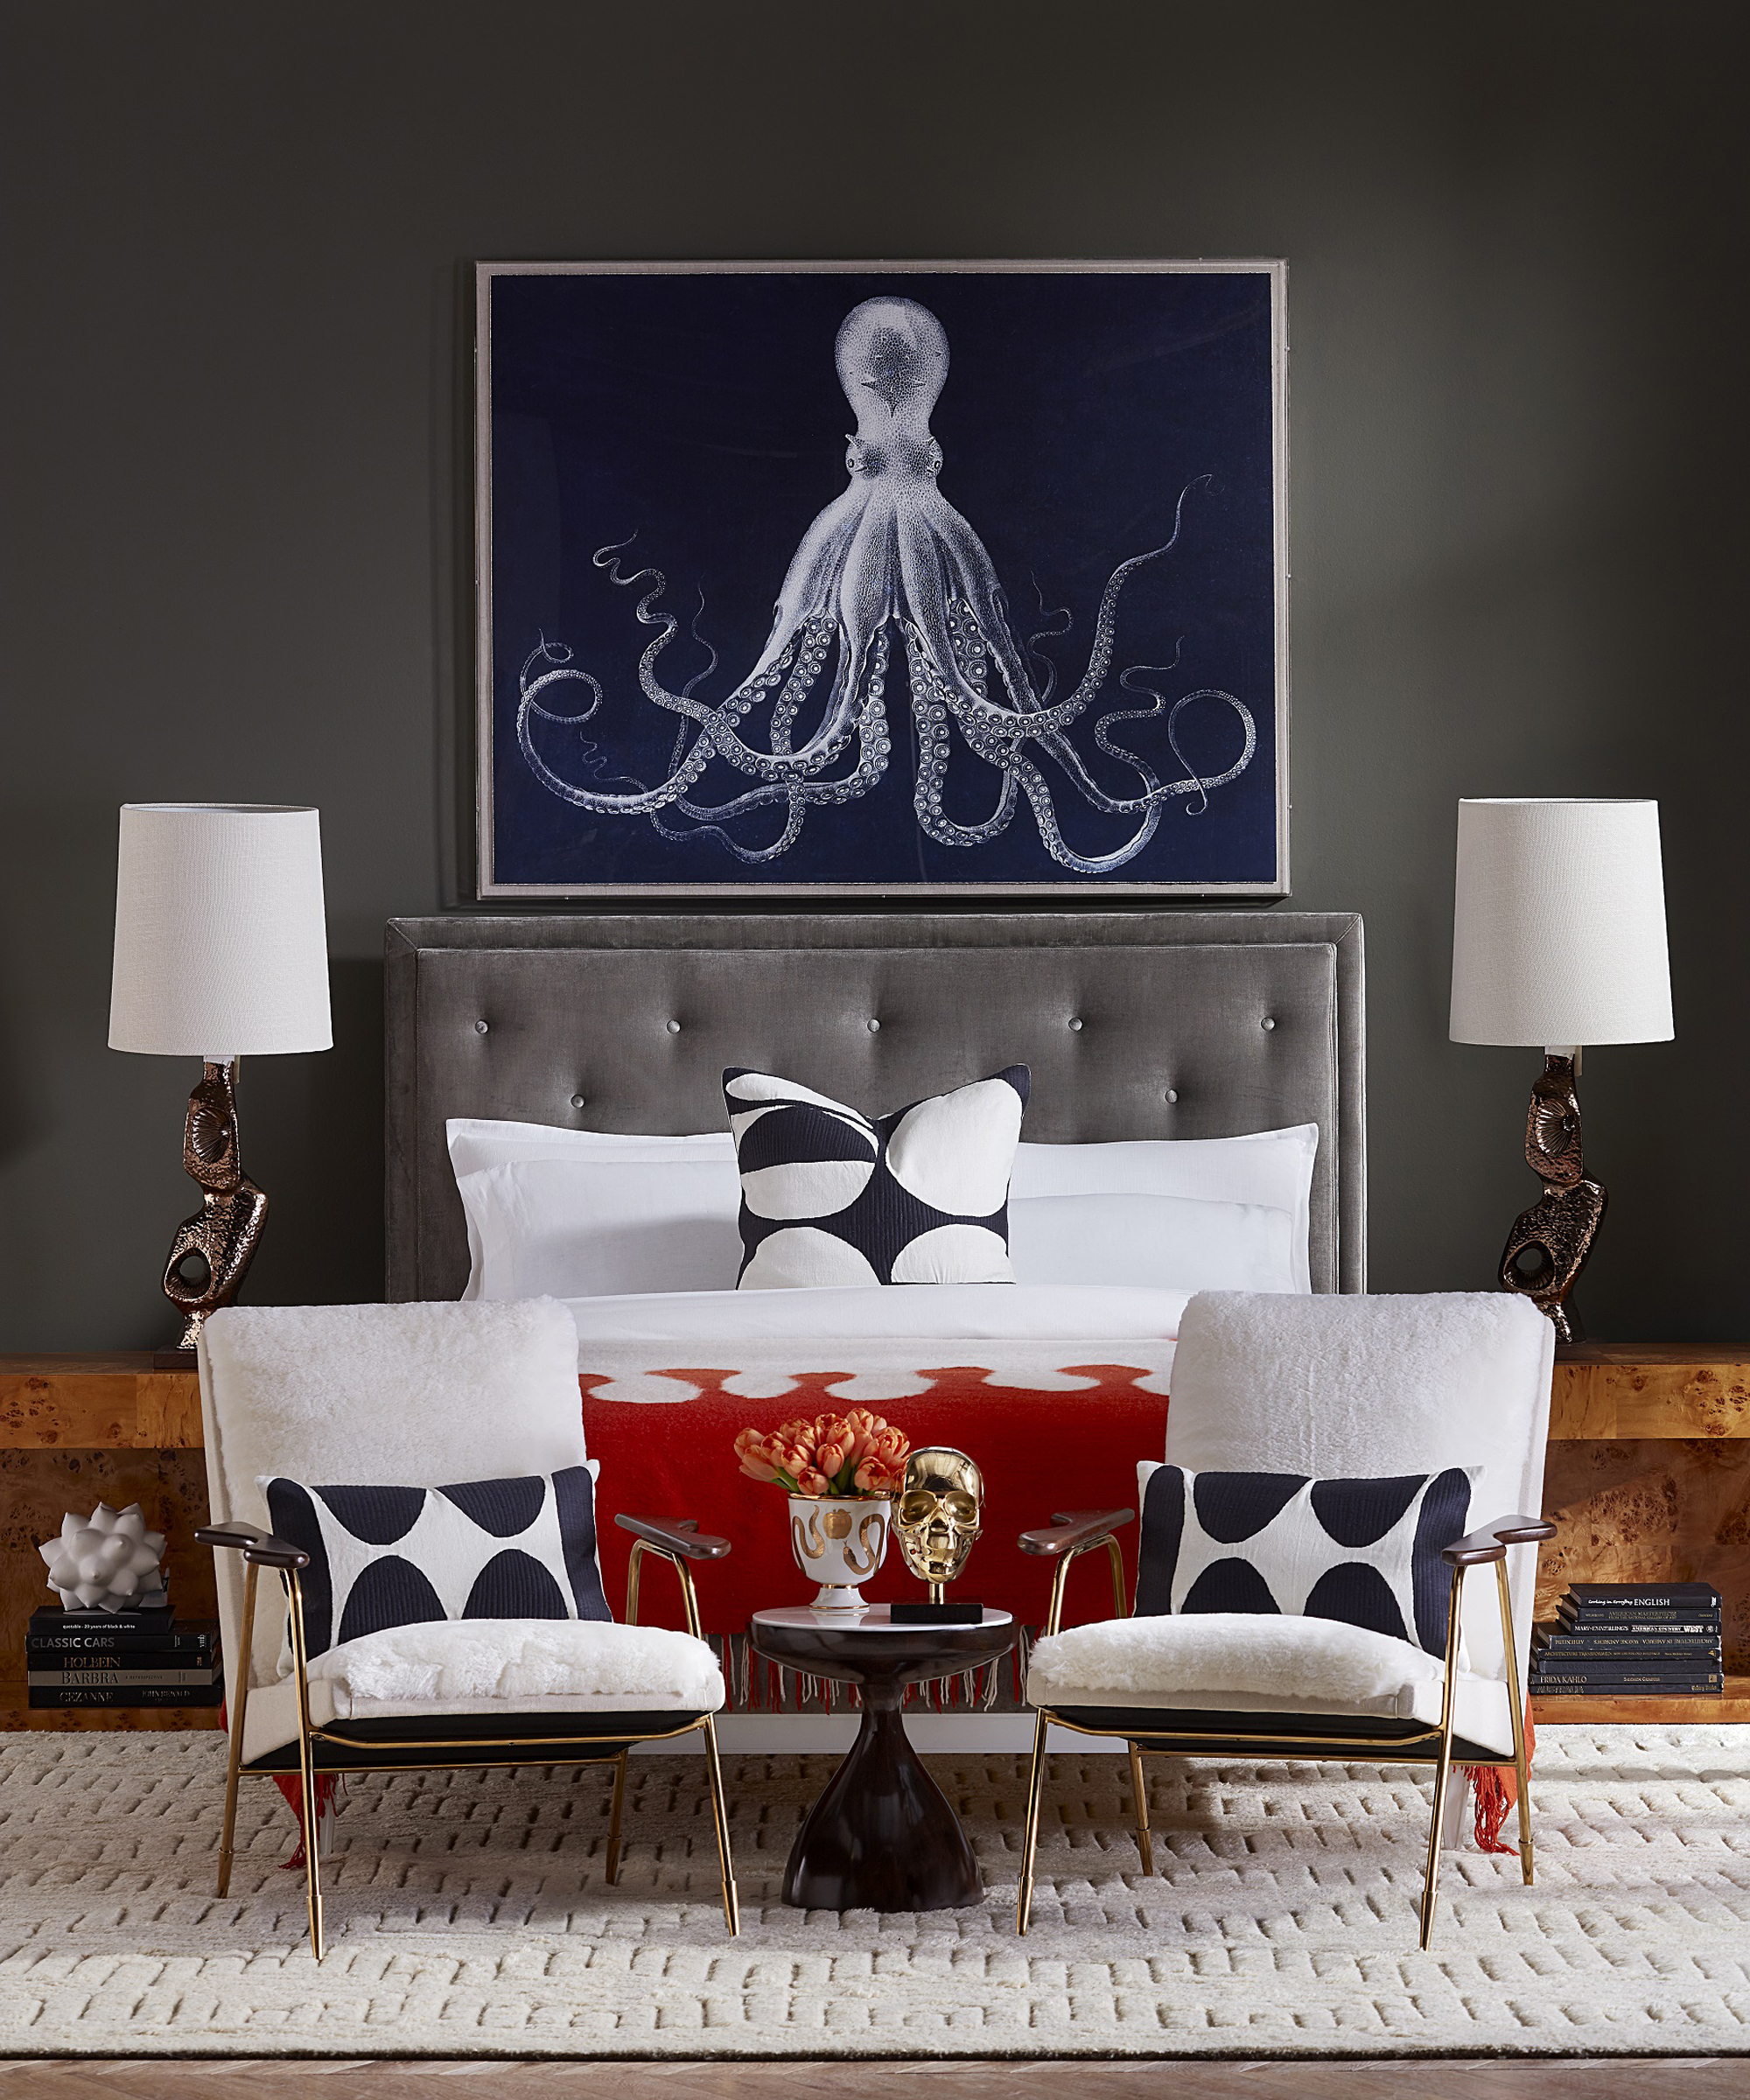 A bedroom color idea with dark grey walls, white armchairs and blue artwork